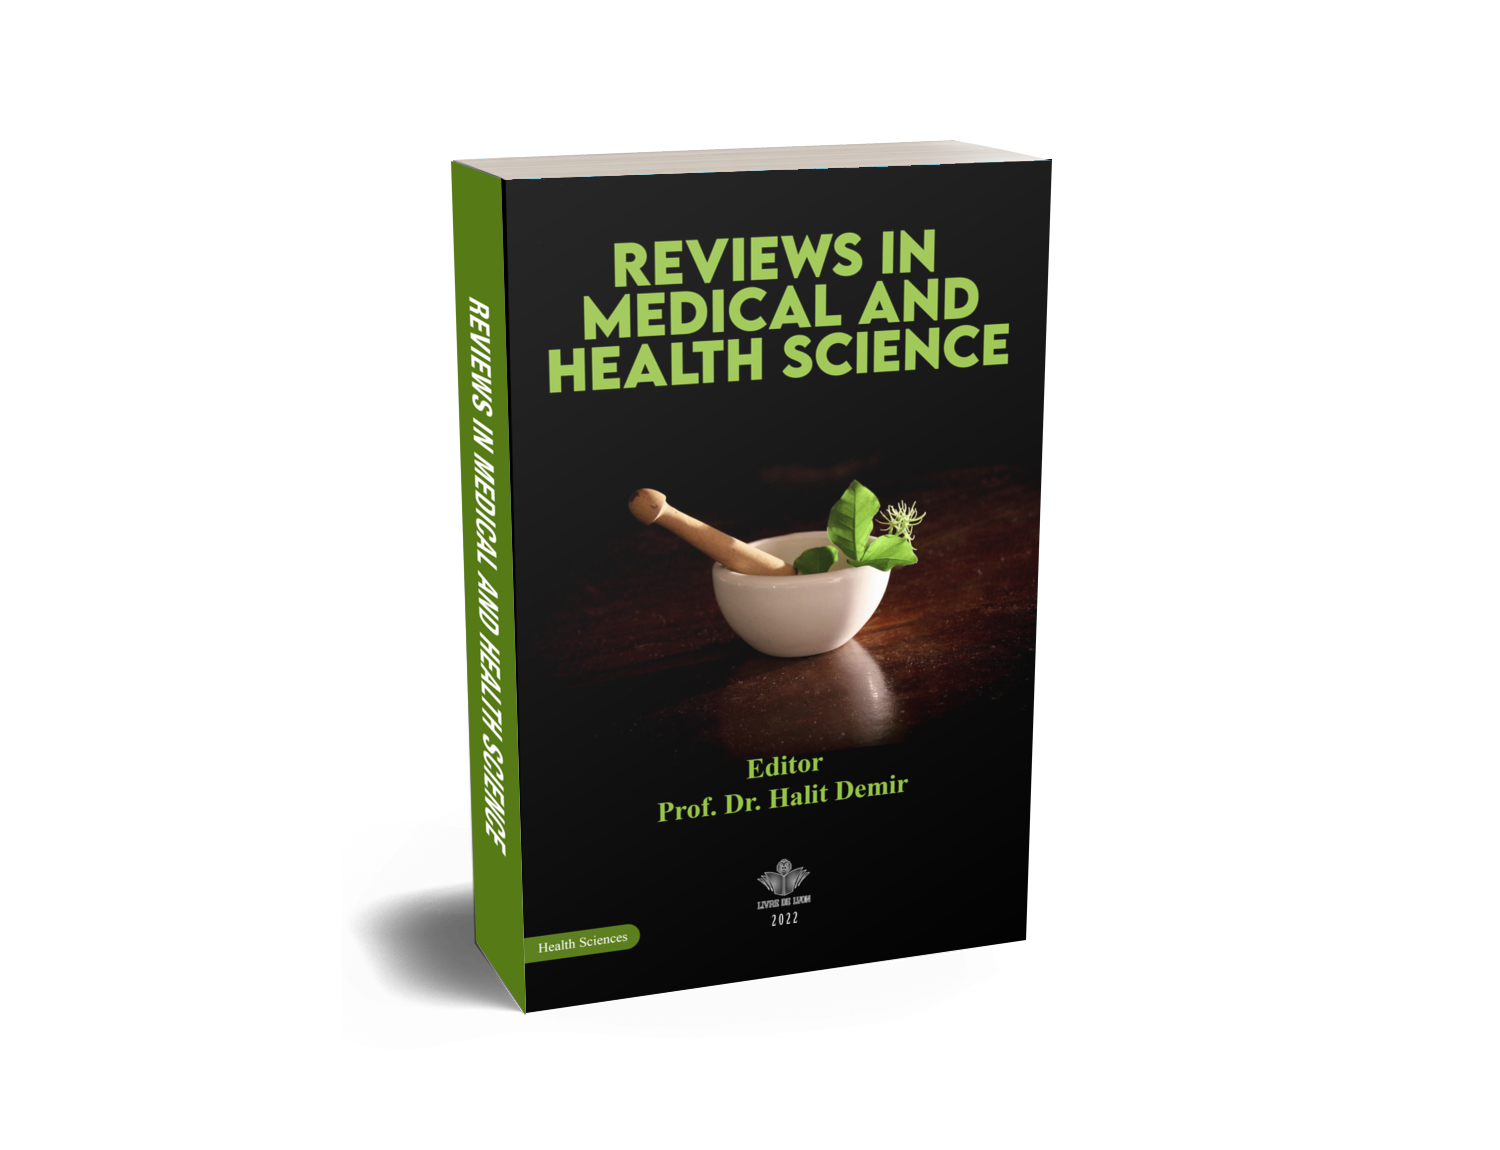 Reviews in Medical and Health Science